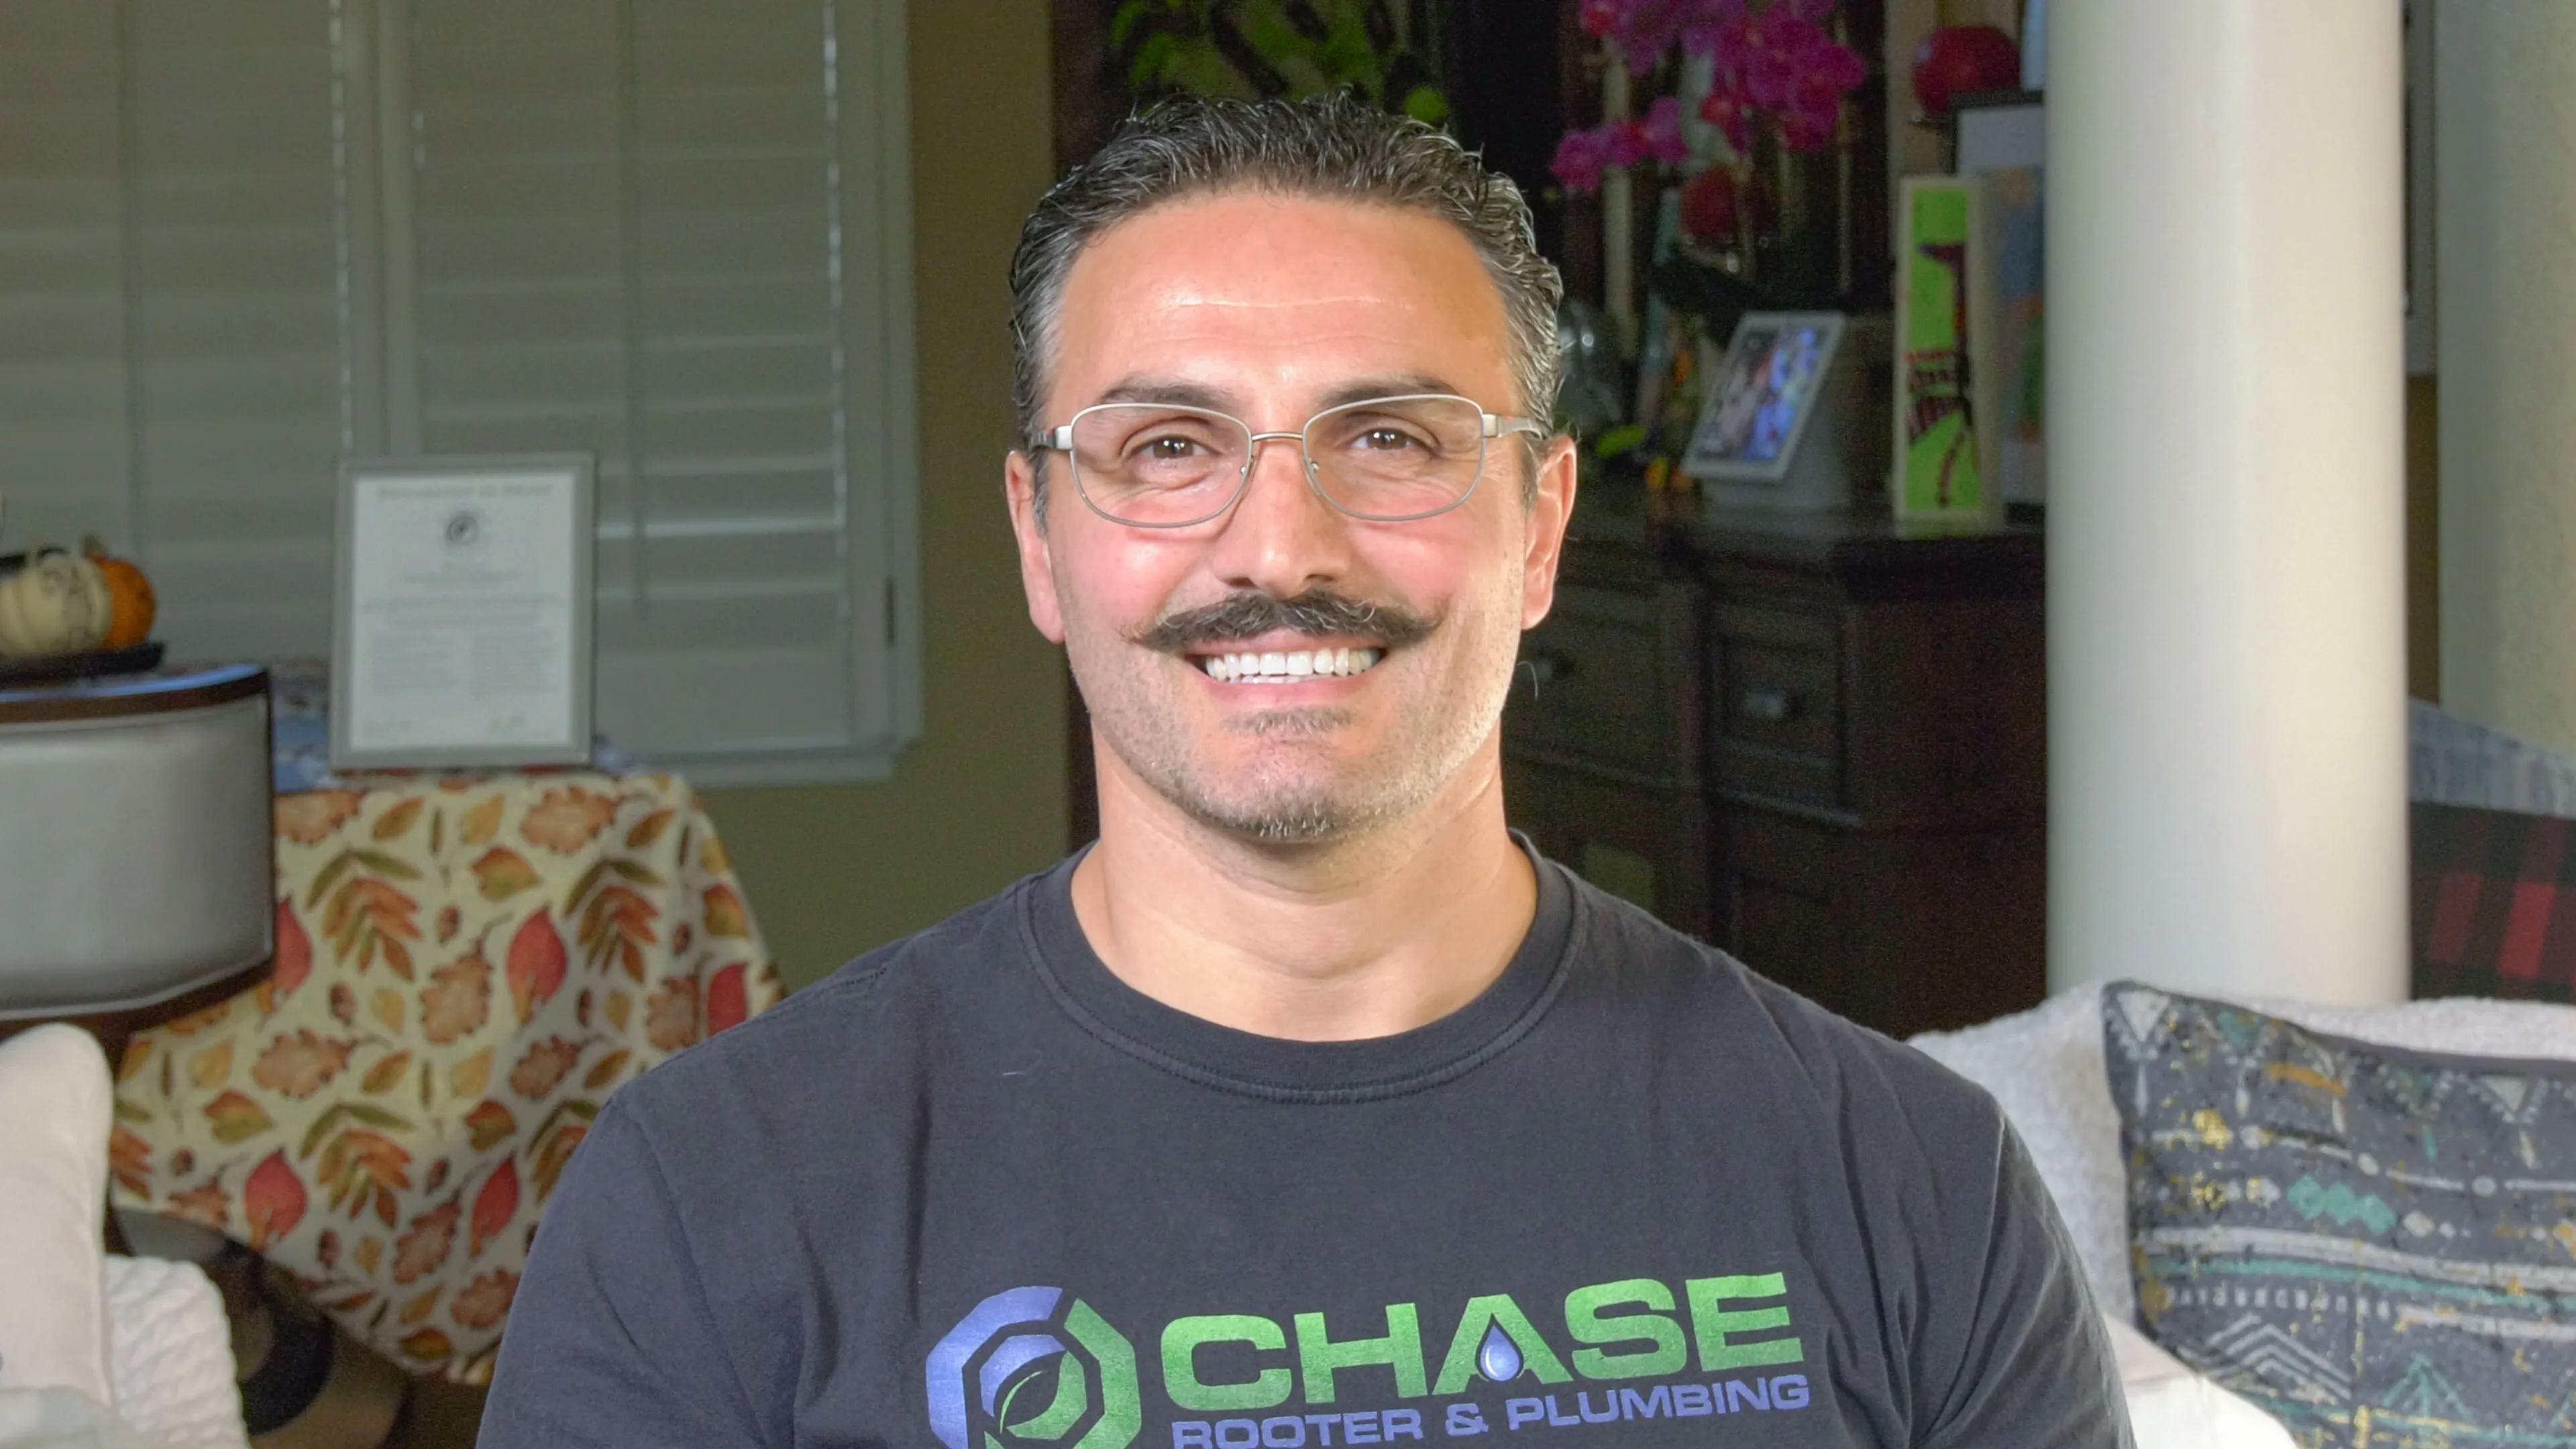 Eric James is Service Manager of Chase Rooter &amp; Plumbing, Inc., a Diamond Certified company. He can be reached at (925) 679-5998 or service@chaseplumbers.com.